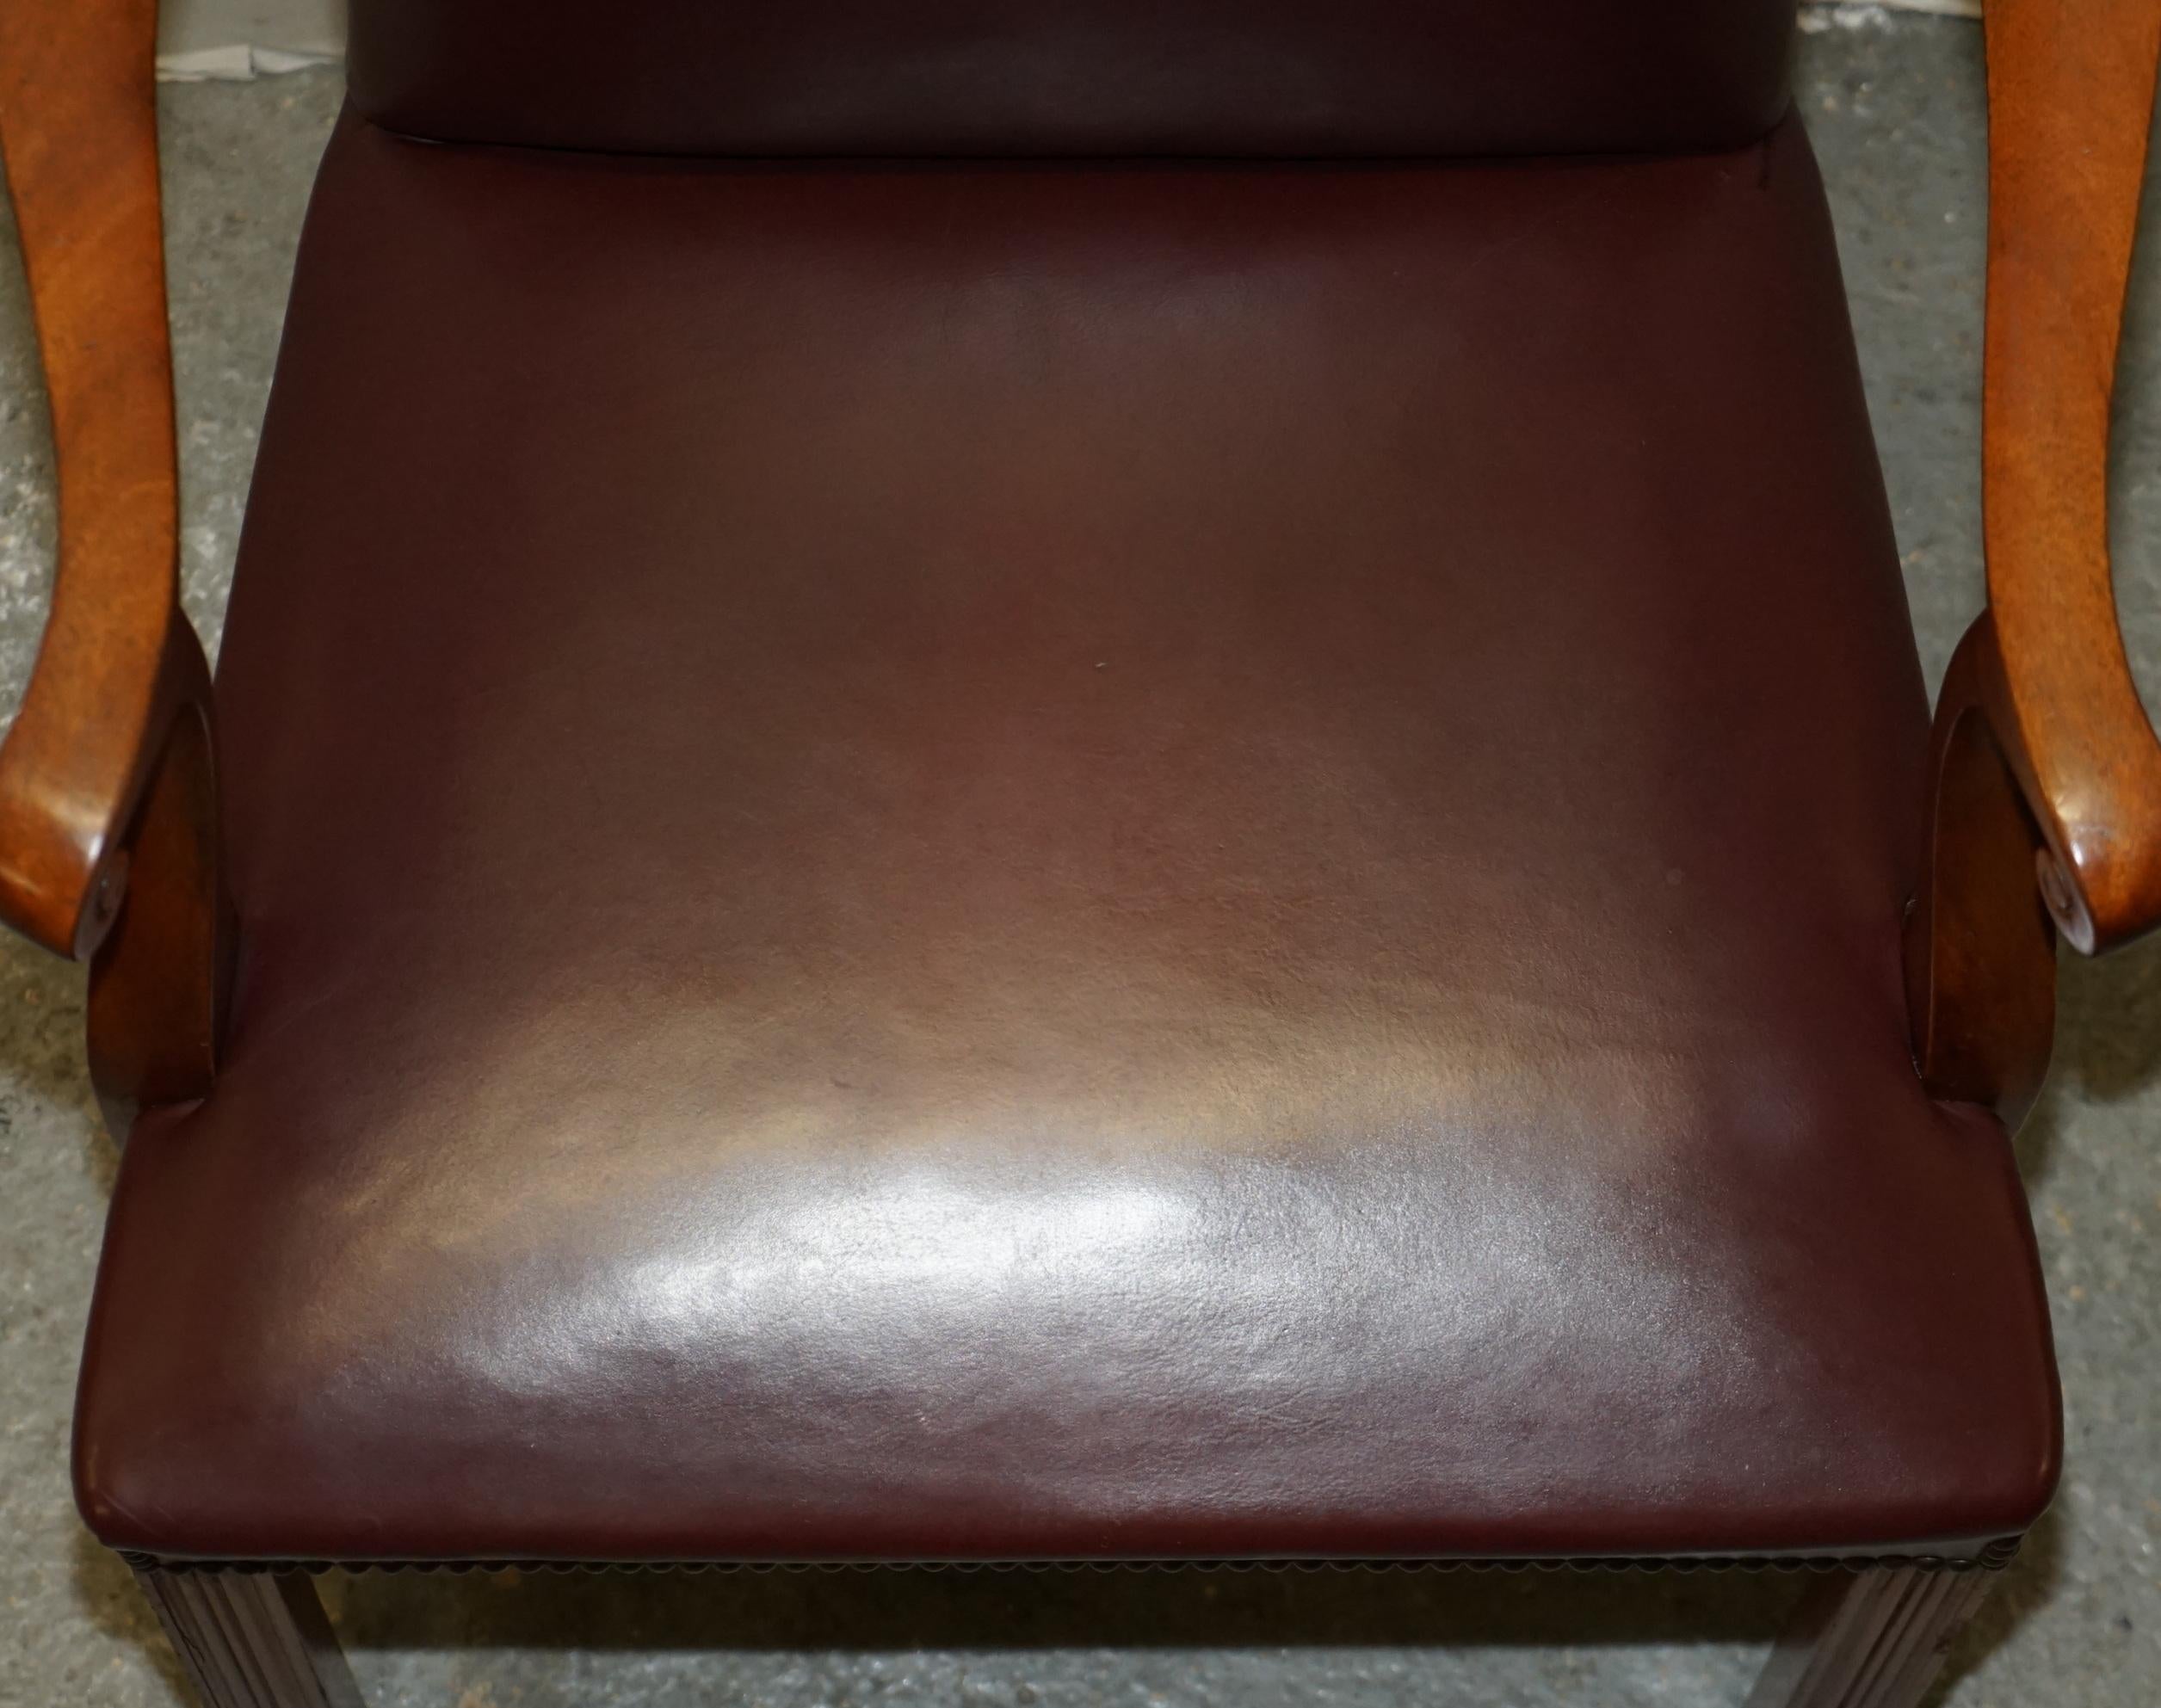 LEATHER CARVER OFFICE CHAIR FROM PRINCESS DIANA'S FAMILY ESTATE SPENCER HOUSE im Angebot 8